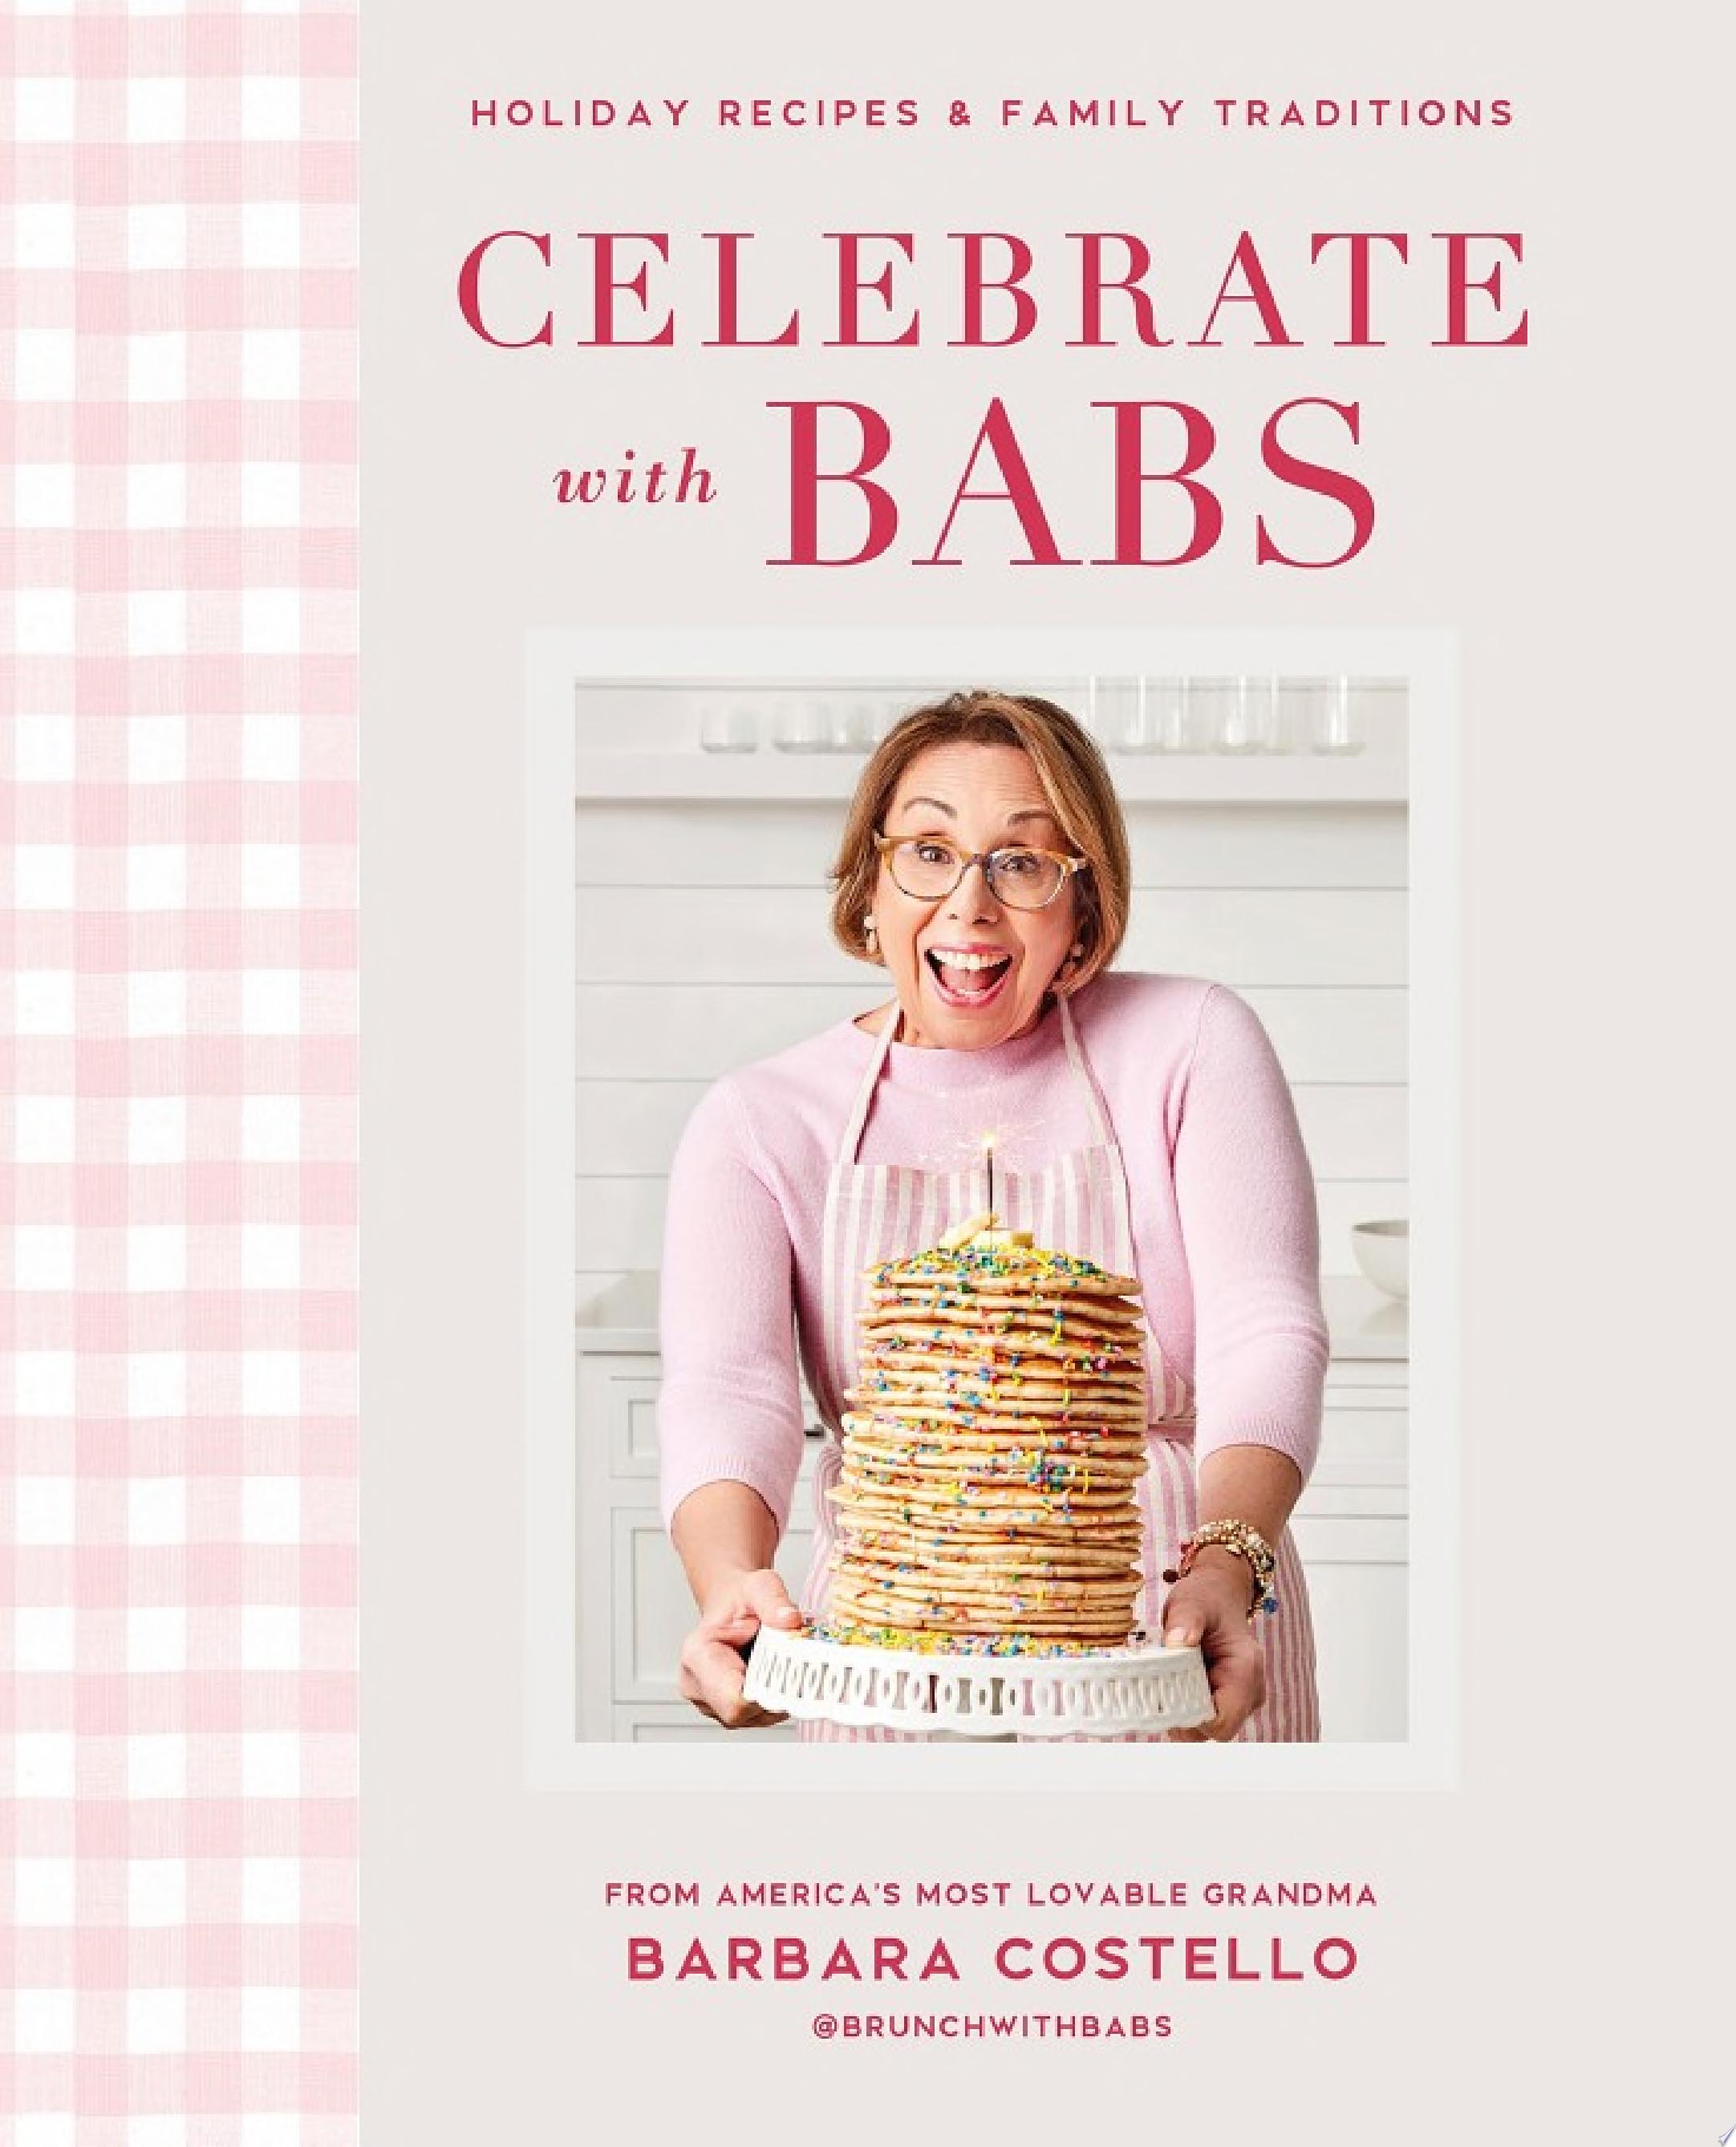 Image for "Celebrate with Babs"